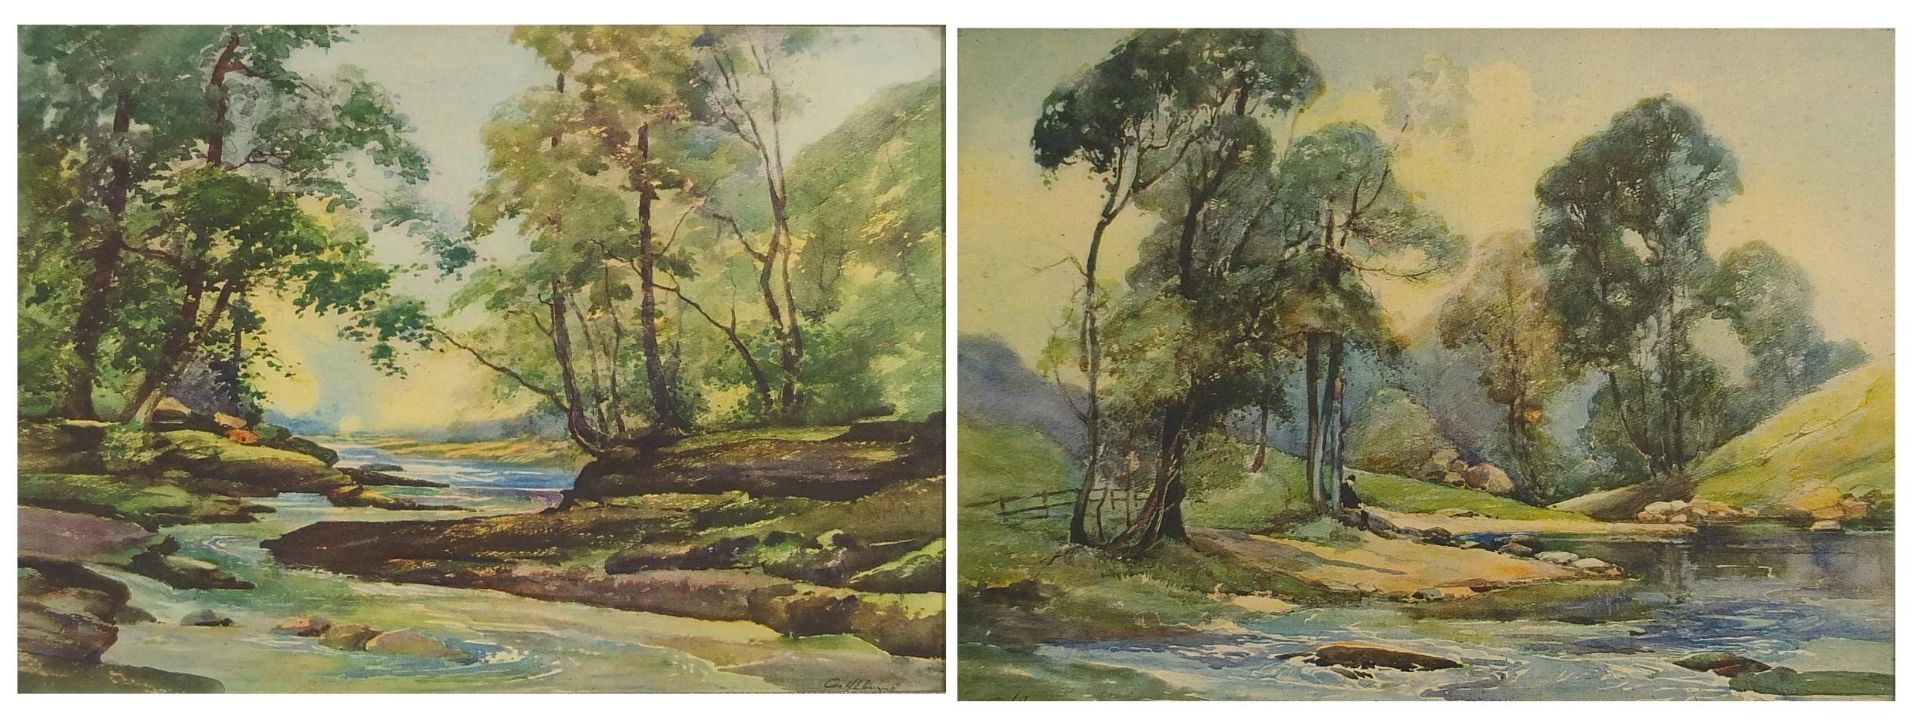 After George Henry Downing - River Eden near Kirkby Stephen and one other, pair of prints, one